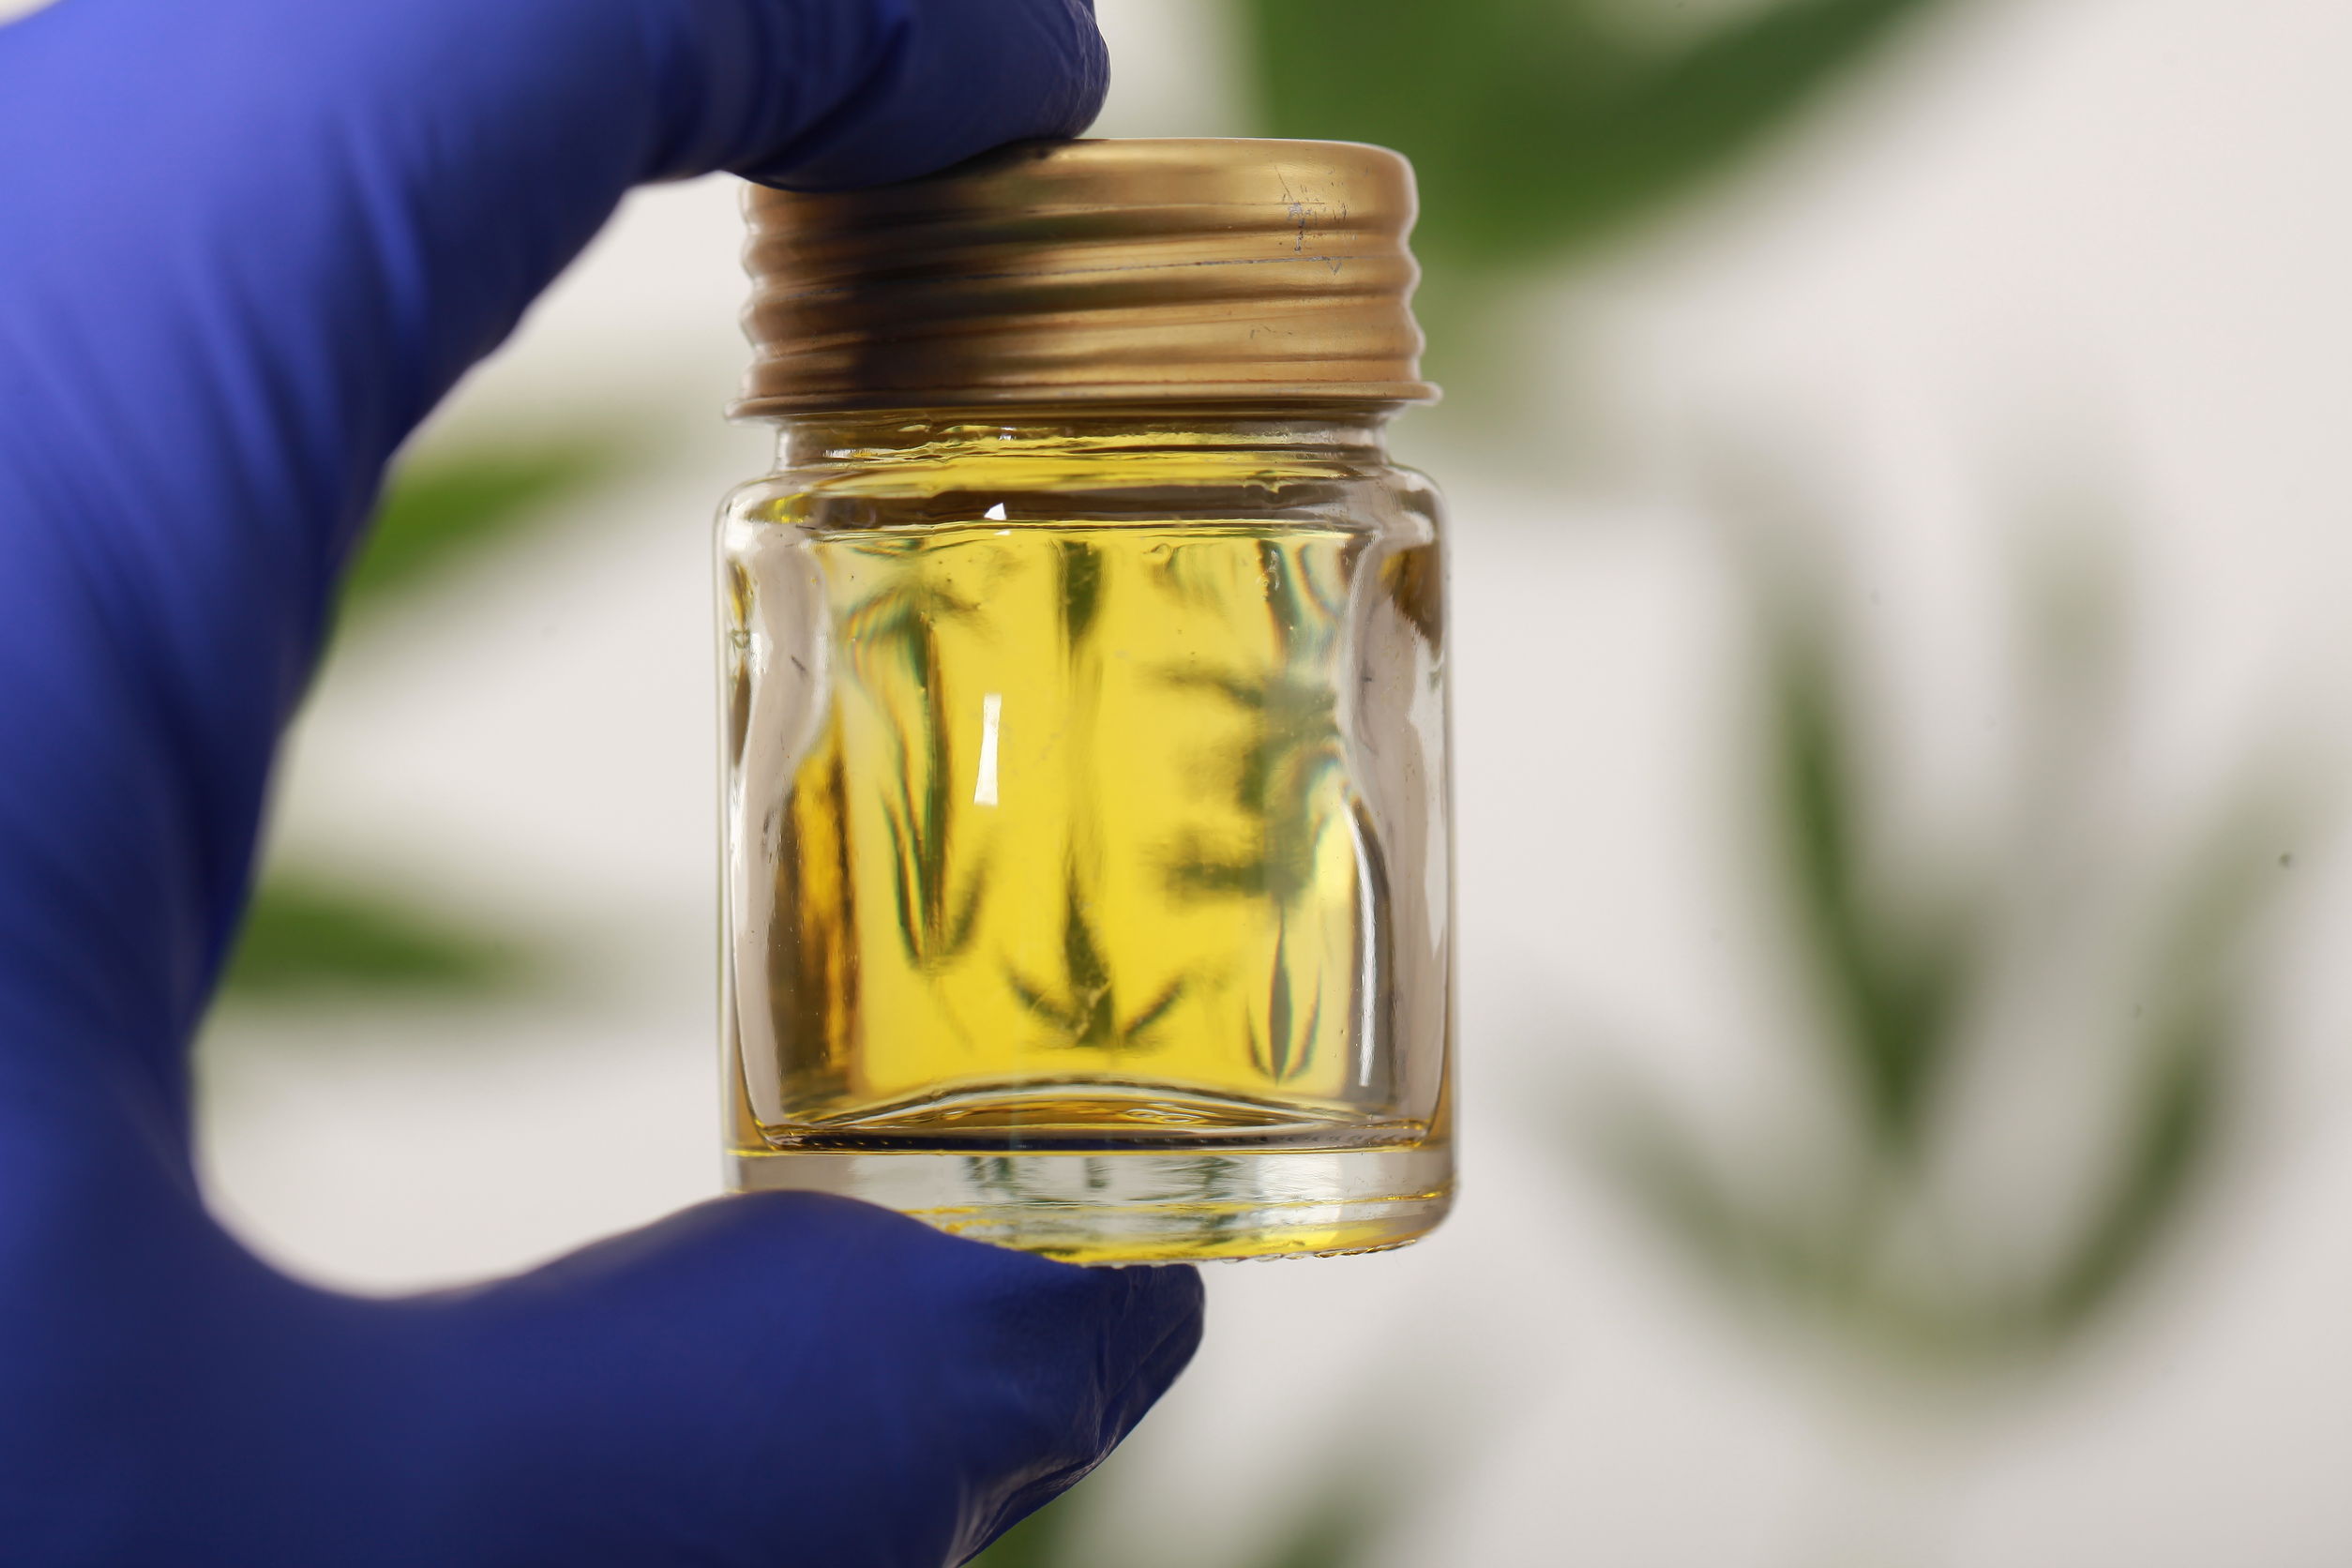 Federal judge orders New York company to stop distributing hemp seed oil after FDA’s repeated warnings